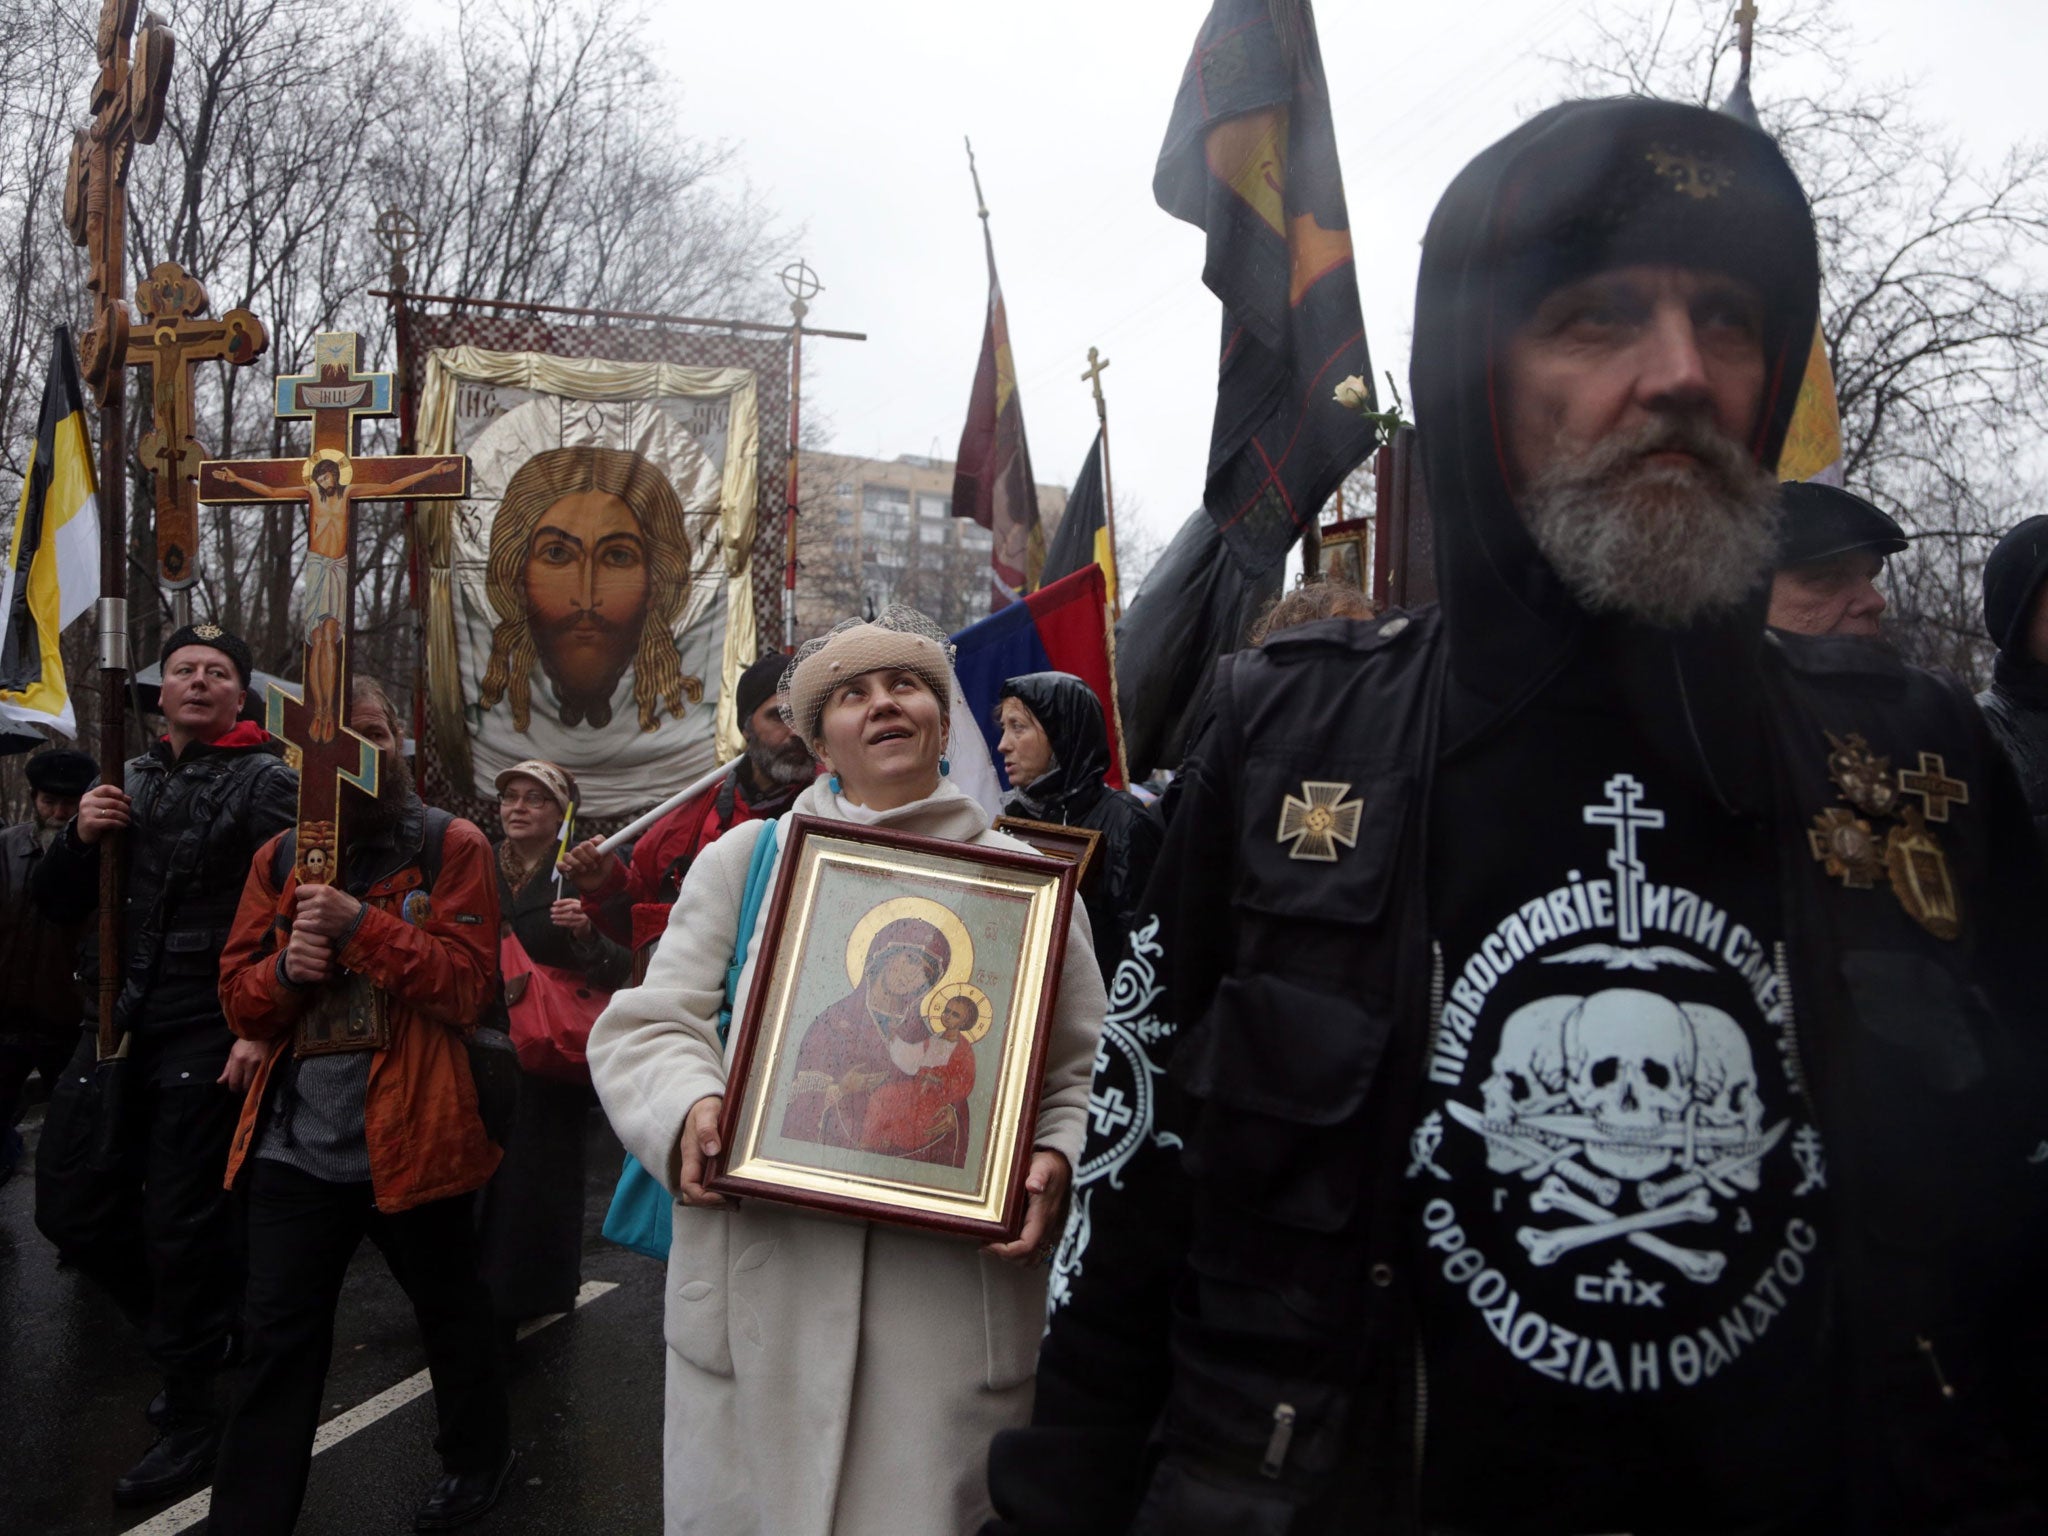 People take part in a march held under the slogan 'For belief, tsar and fatherland' in Moscow. The march organized on the National Unity Day is devoted to the 400-year anniversary of Romanov imperial house